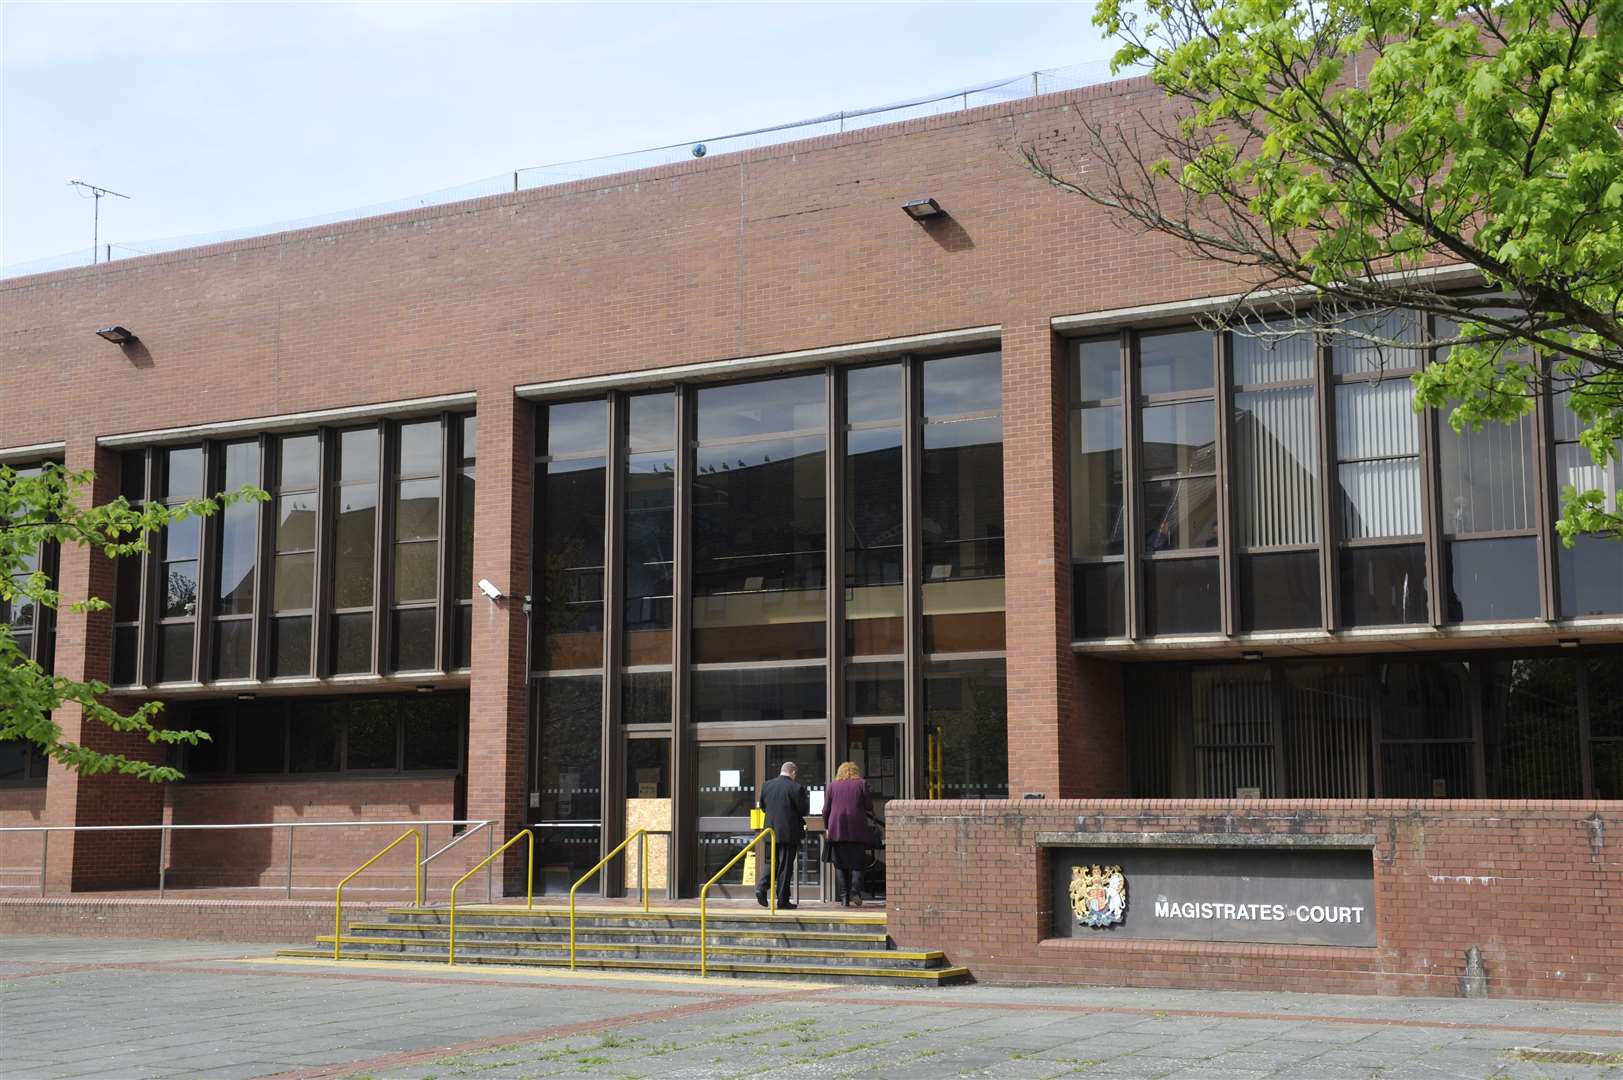 Parnica appeared at Folkestone Magistrates' Court